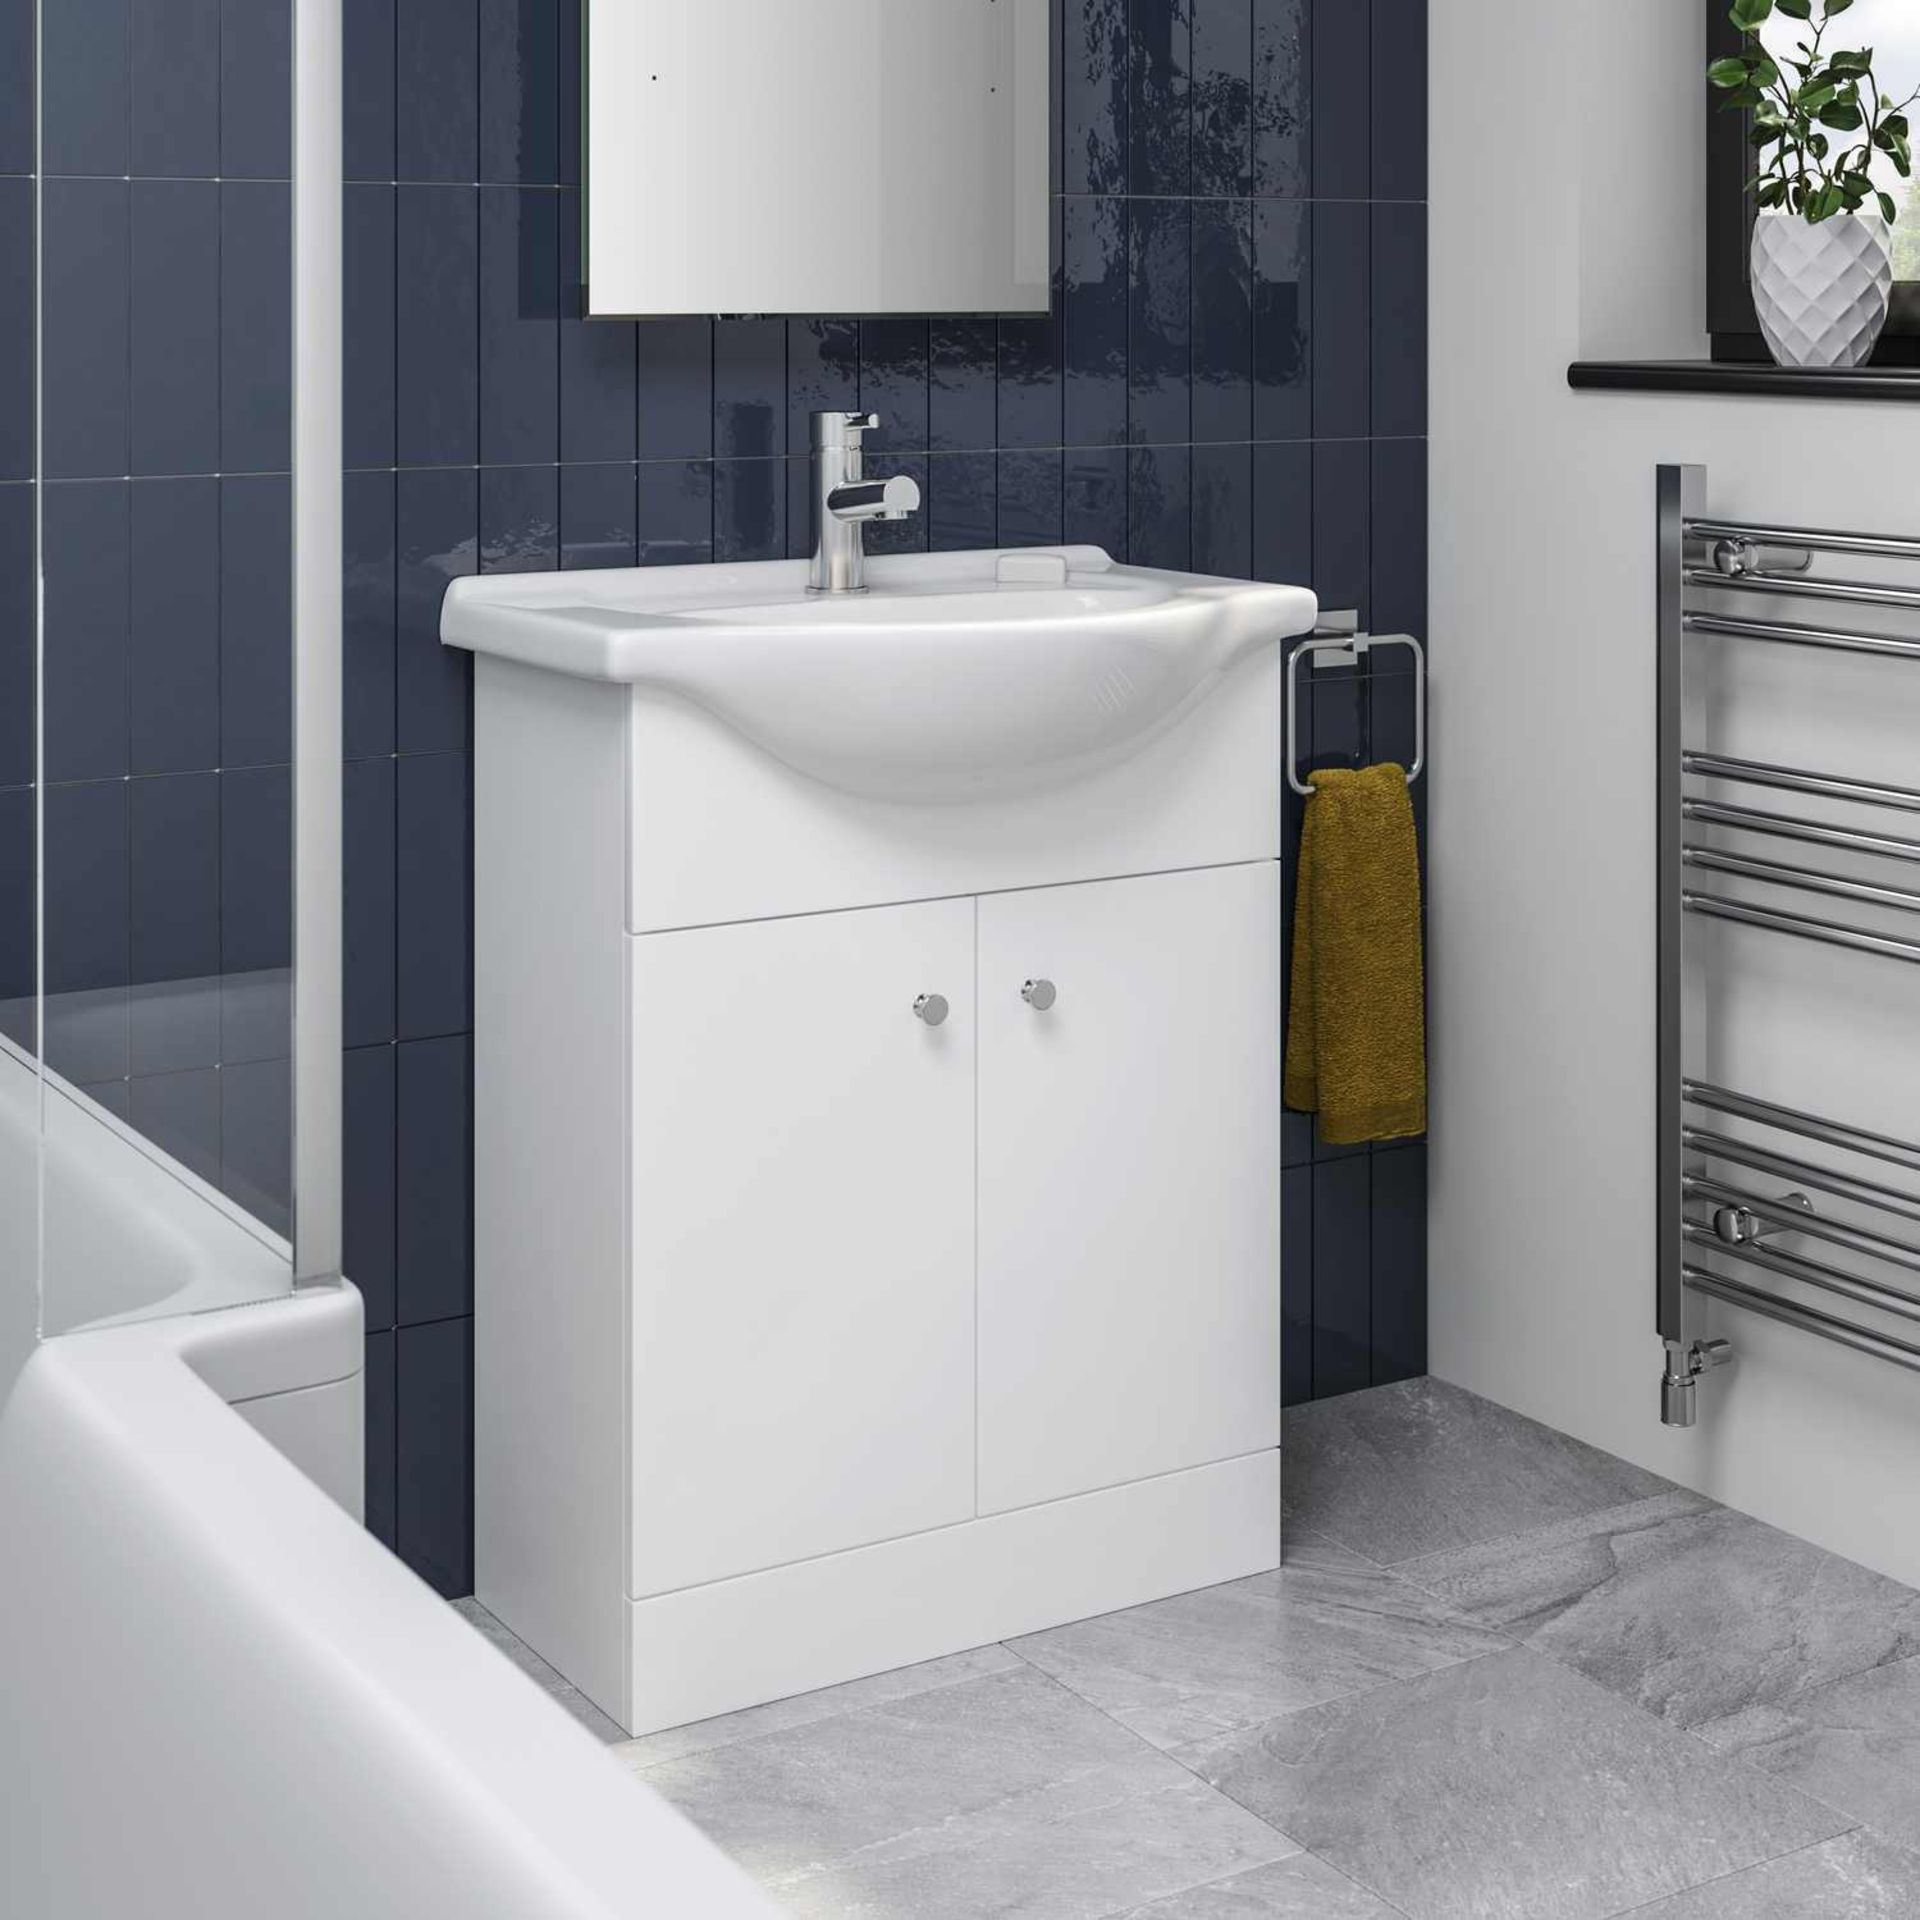 NEW & BOXED 650mm Quartz White Basin Vanity Unit- Floor Standing. RRP £399.99.Comes complete ... - Image 2 of 3